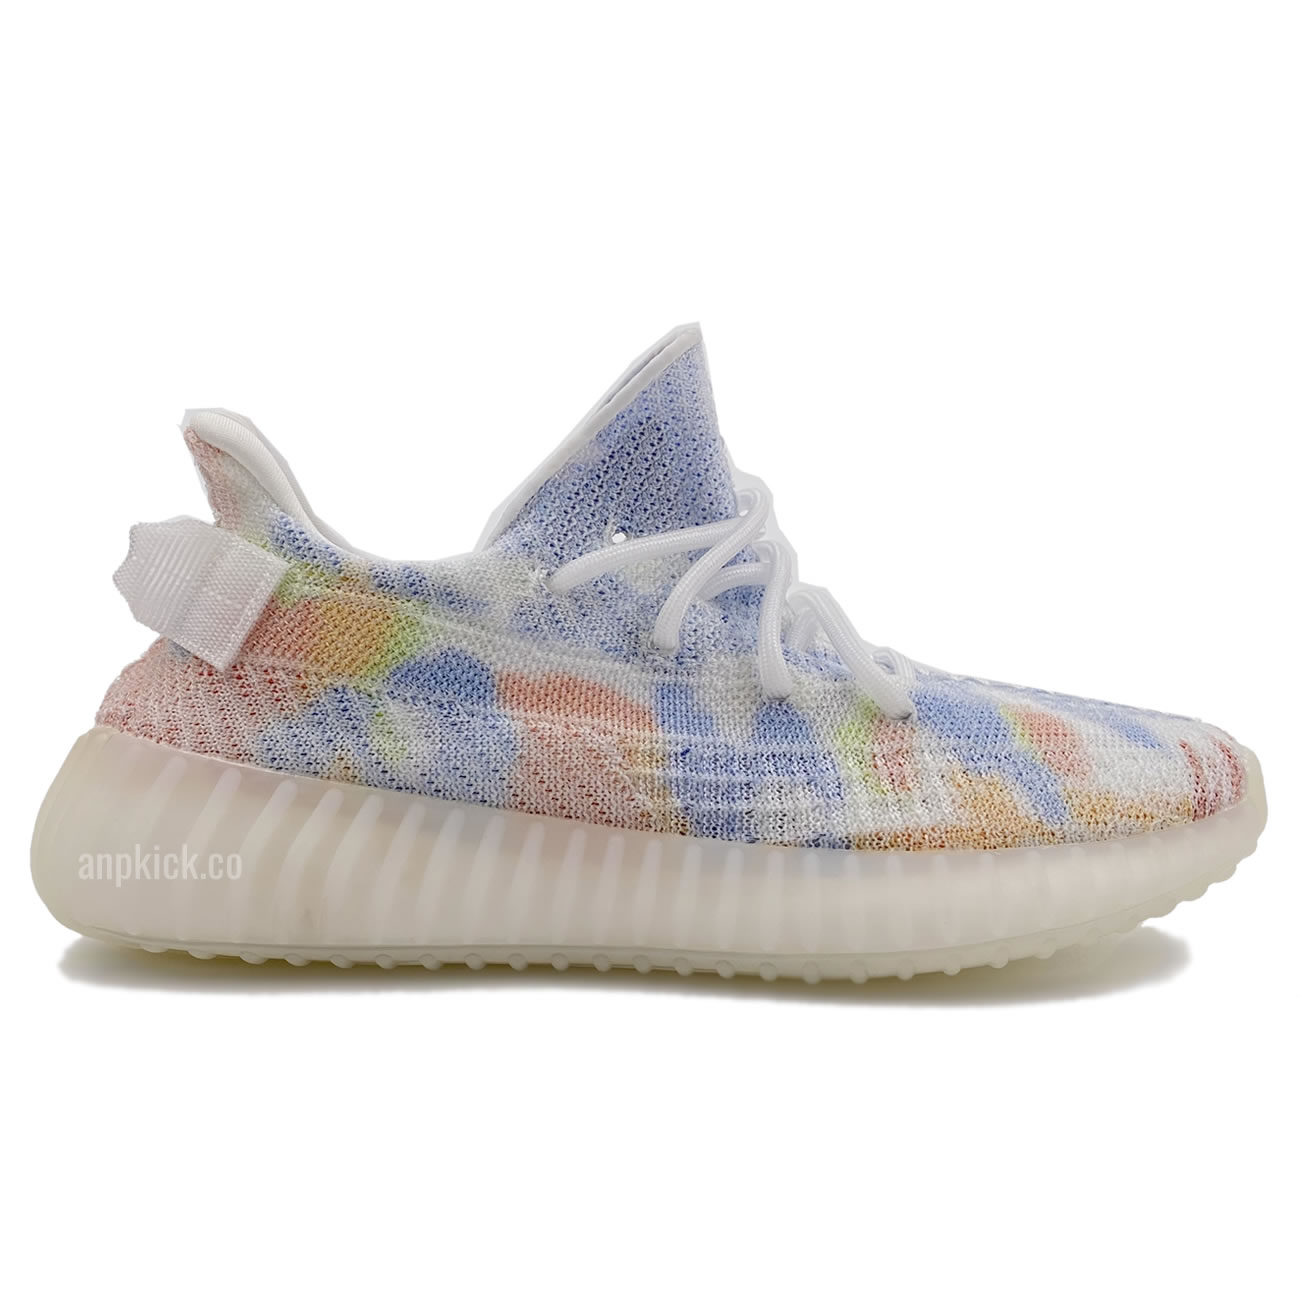 New Custom Yeezy Boost 350 V2 Colorful For Sale (2) - newkick.org